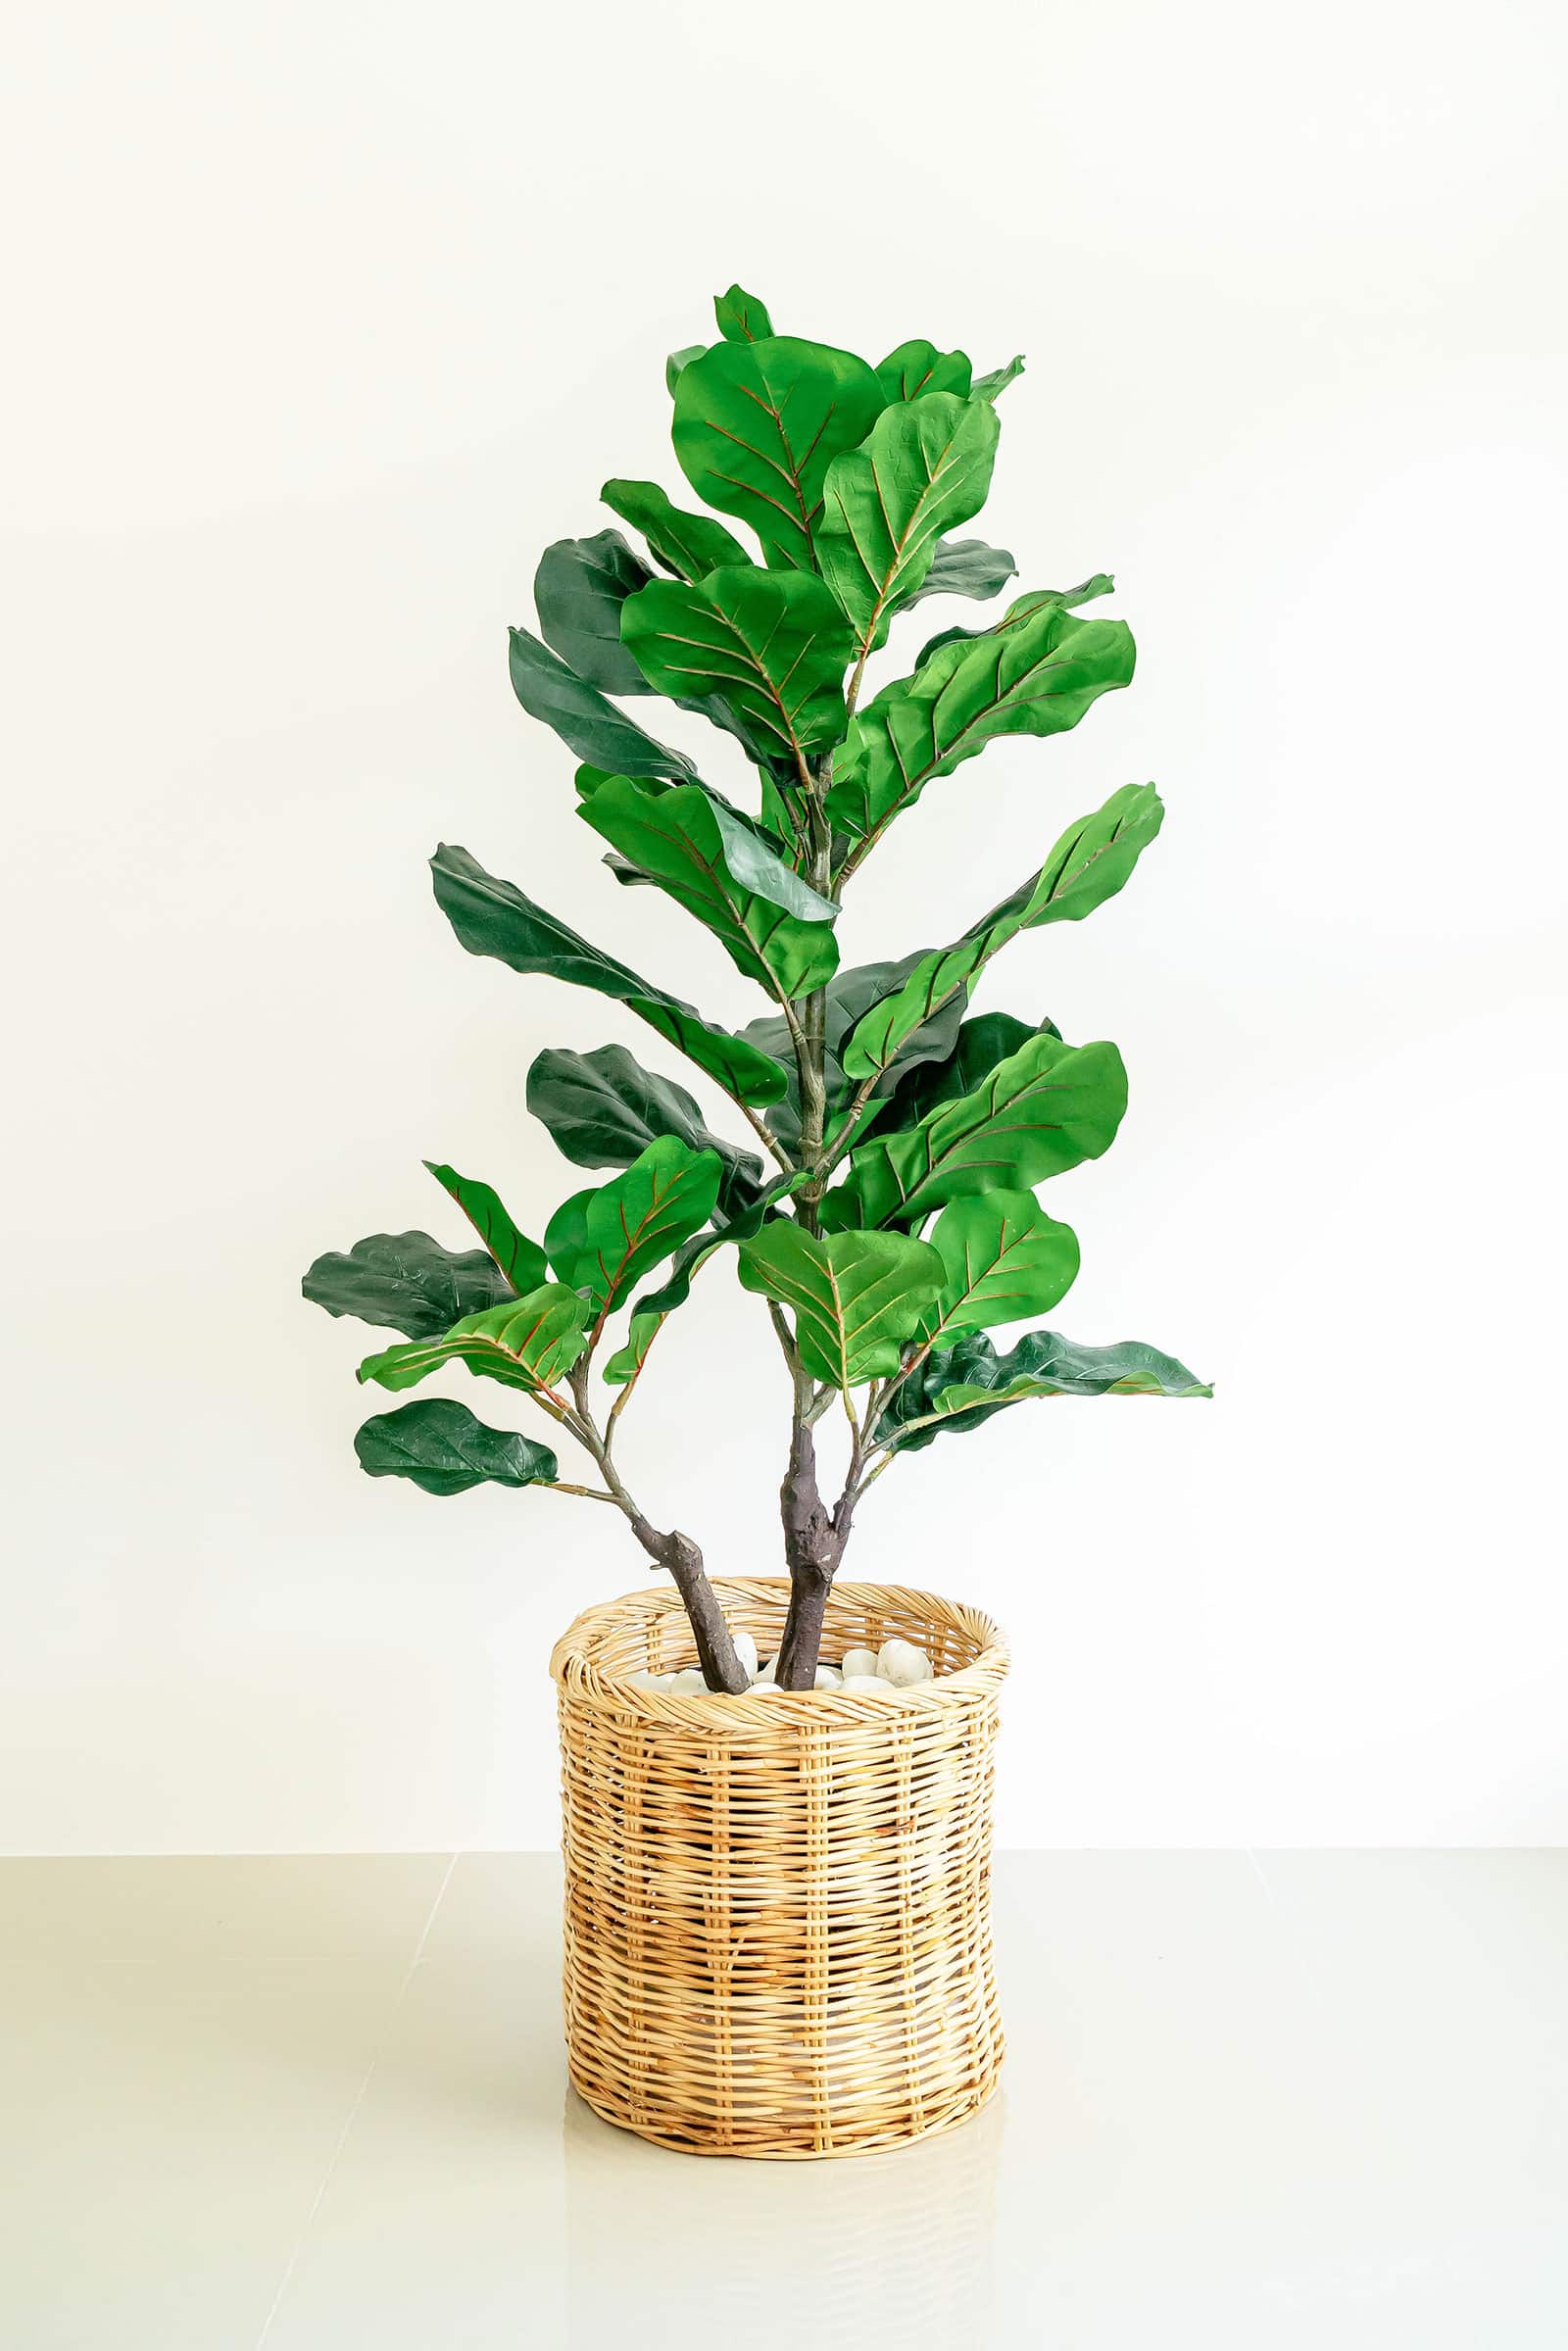 A healthy fiddle leaf fig houseplant in a bamboo planter basket, set on a white floor against a white wall